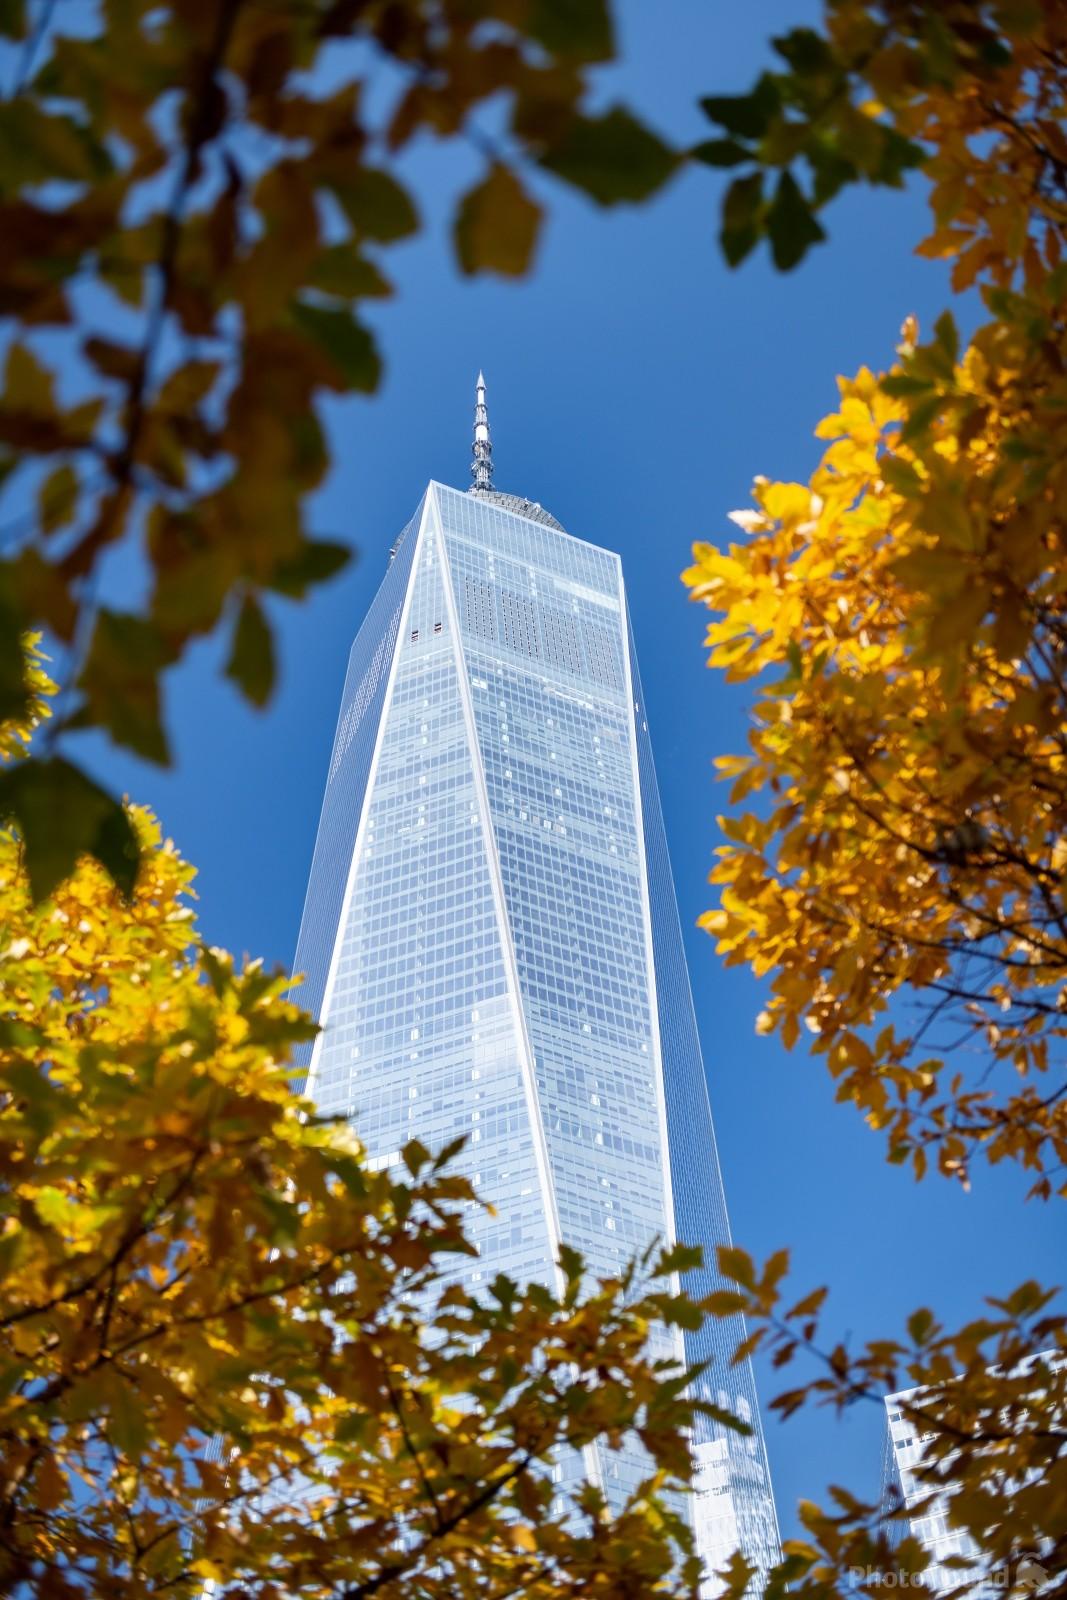 Image of One World Trade Center from Ground Zero by VOJTa Herout